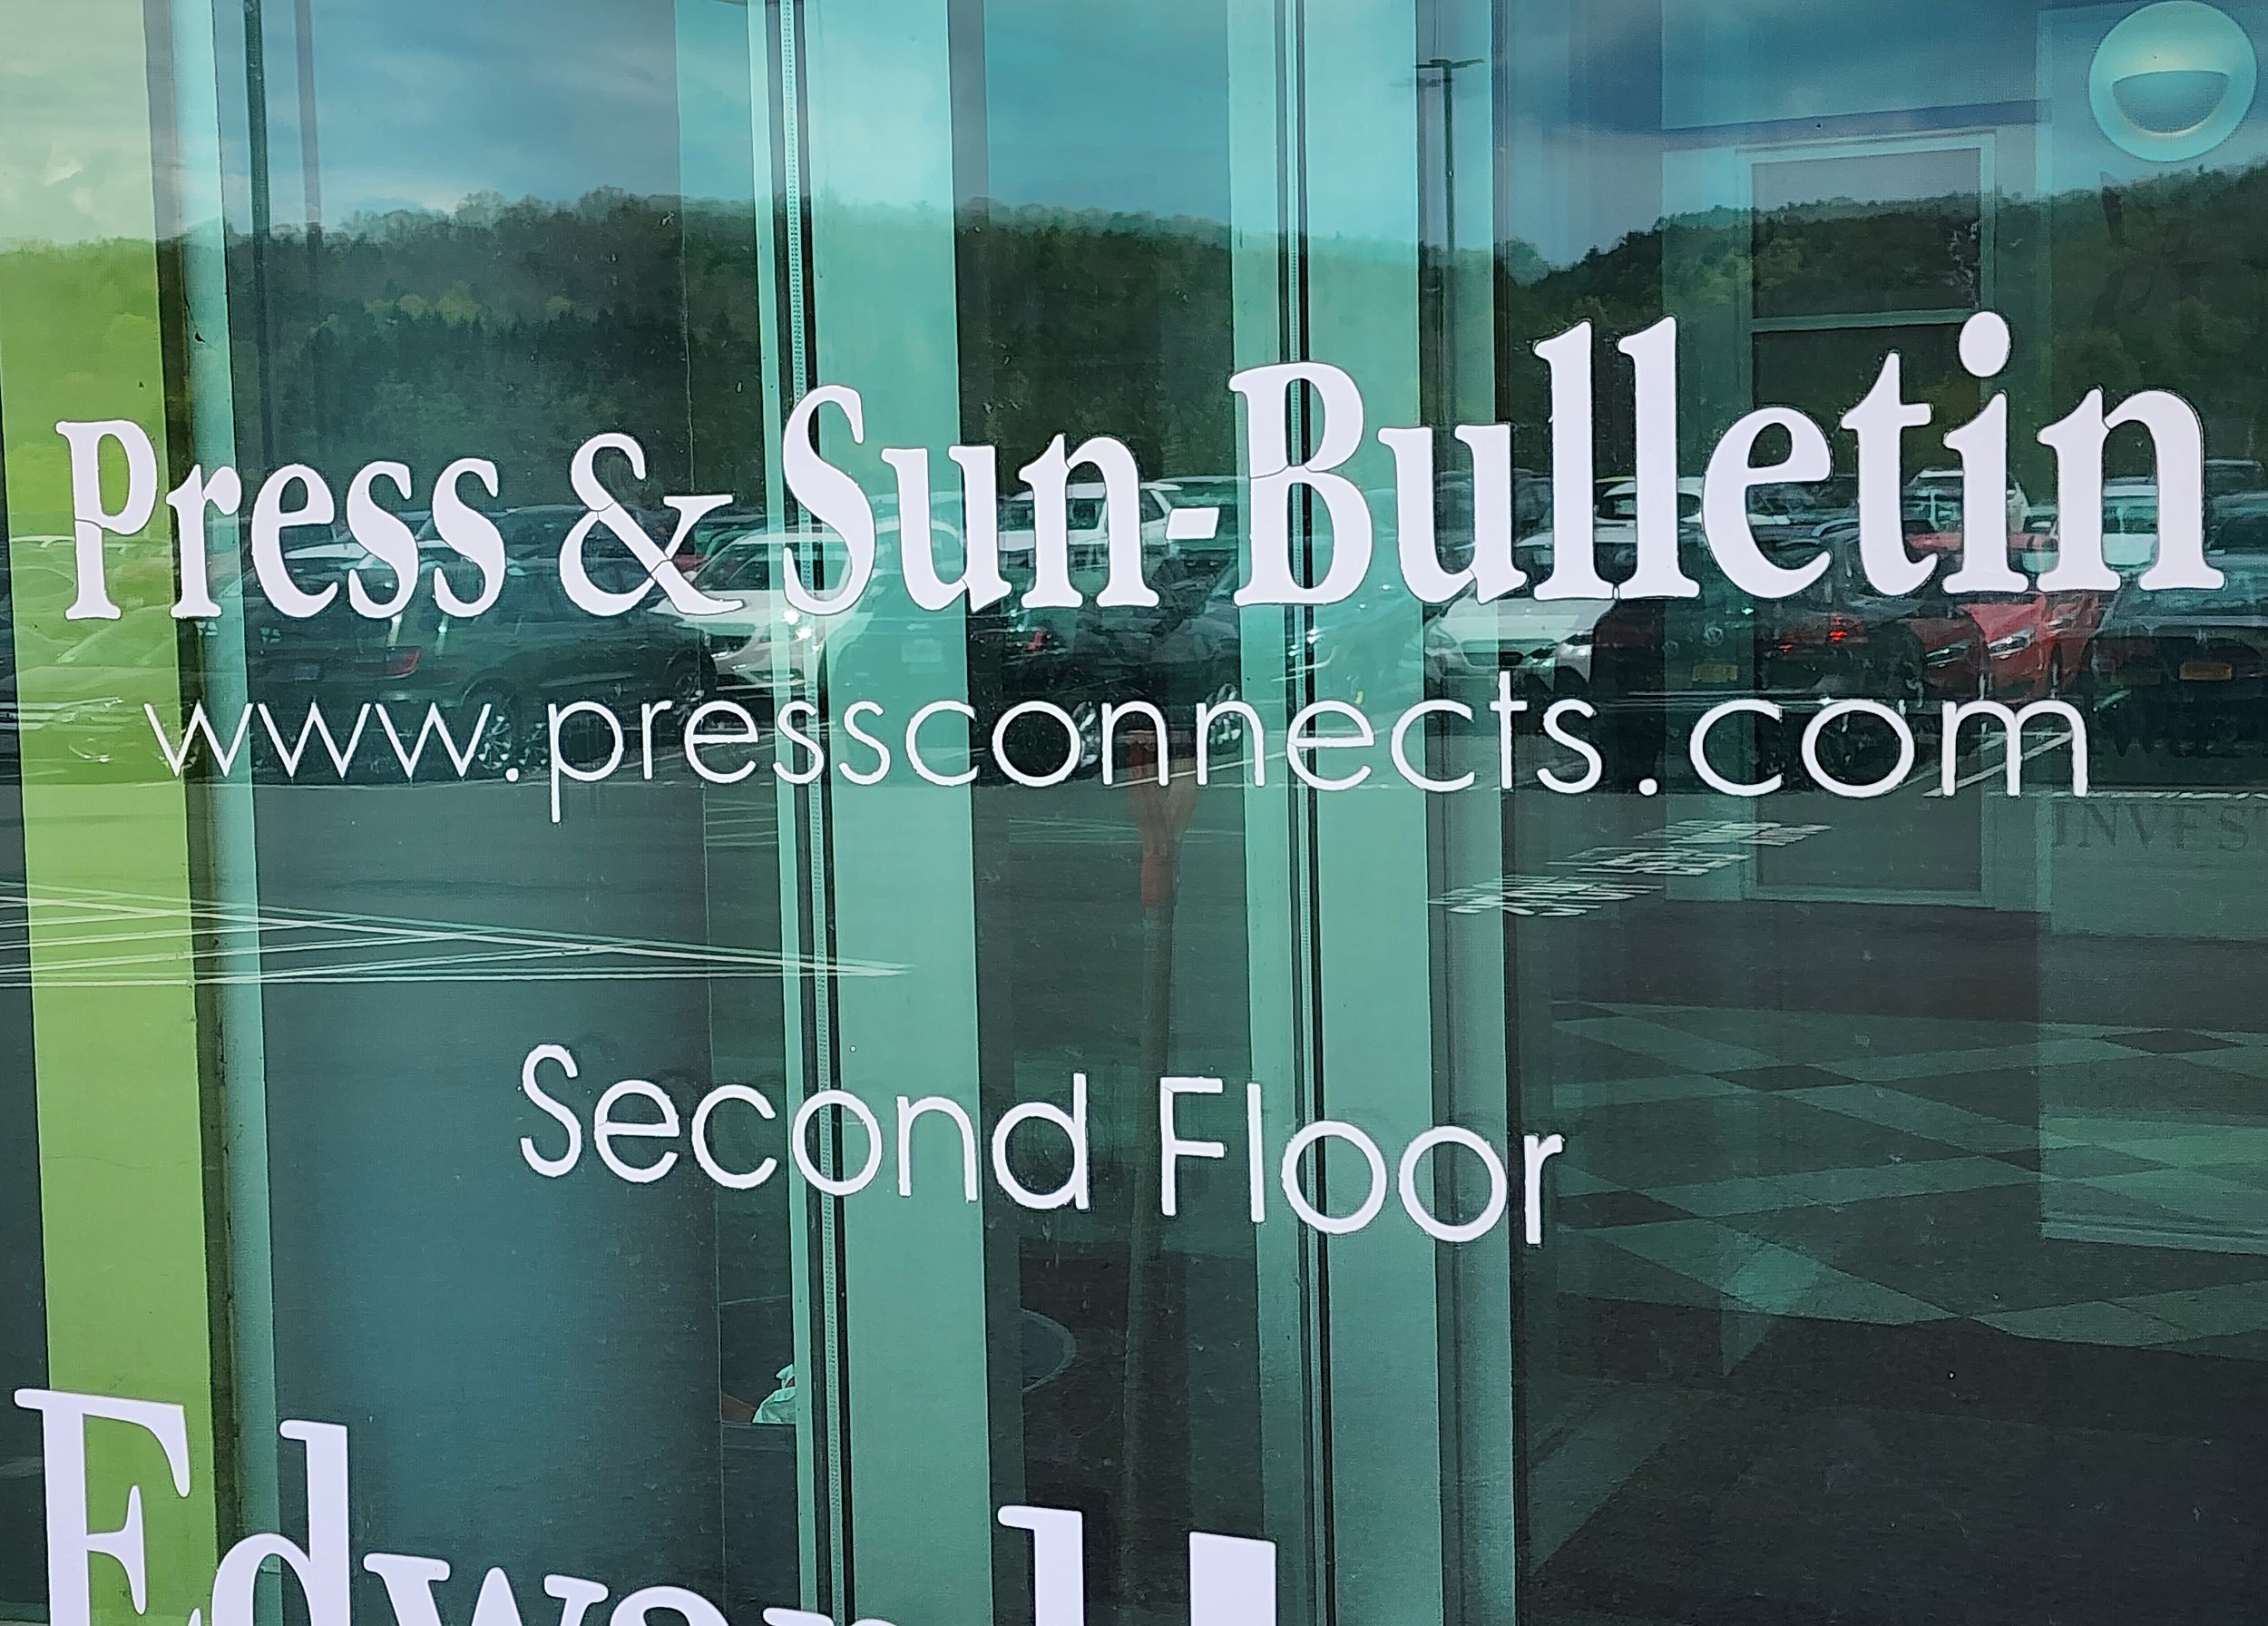 Press and Sun-Bulletin Moves Out of Corporate Park Office Space pic